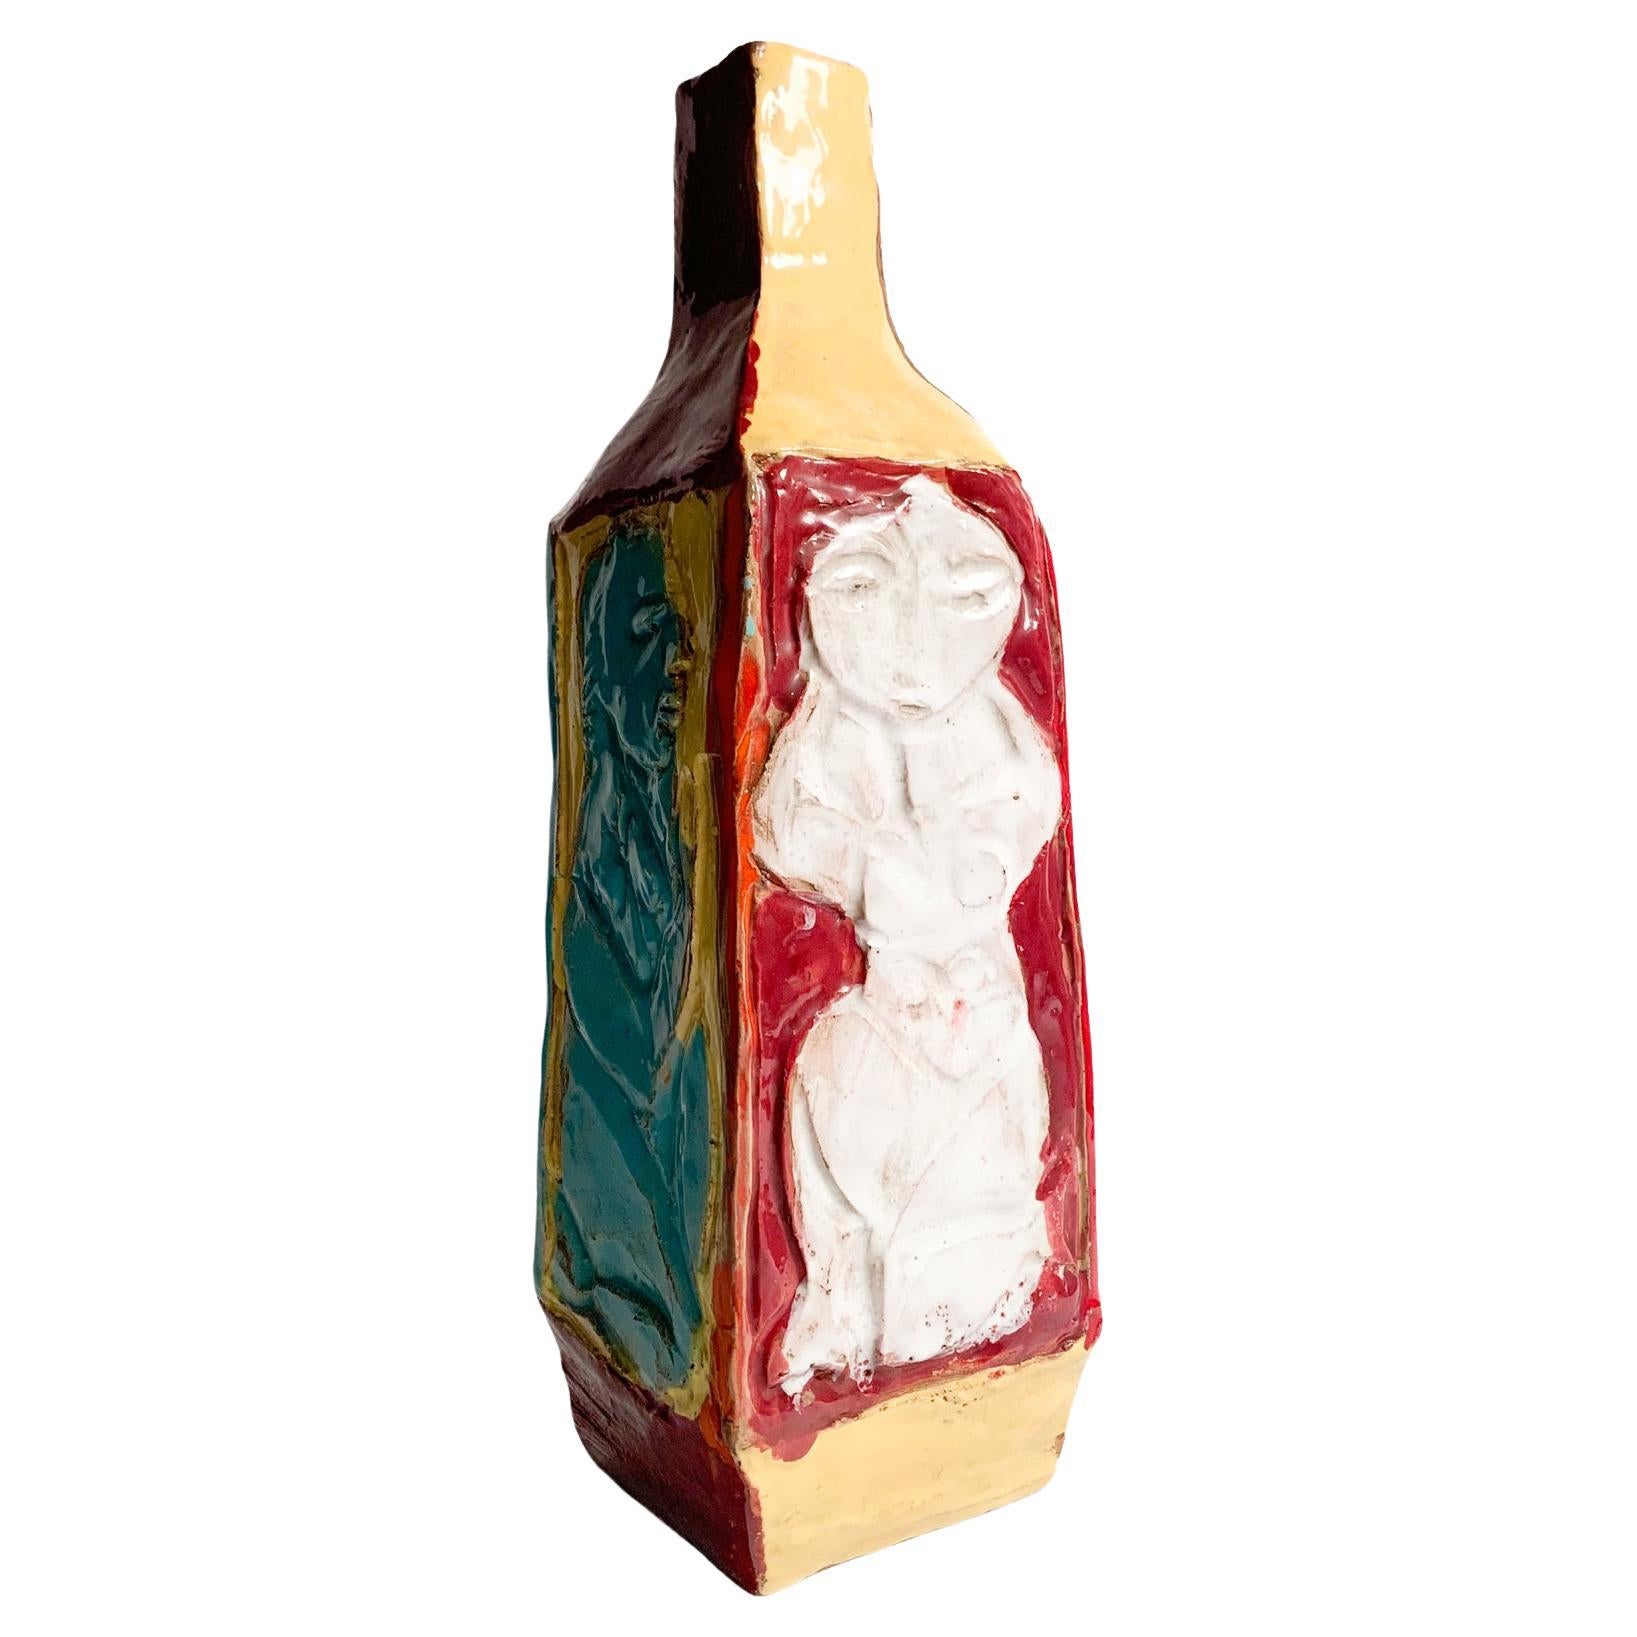 Multicolored ceramic vase with geometric shape, in relief, whose creation is attributed to the Cantagalli Manufacture in the 1950s

Ø 13 cm h 31 cm

Manifattura Cantagalli is a historic Italian company specialized in the production of artistic